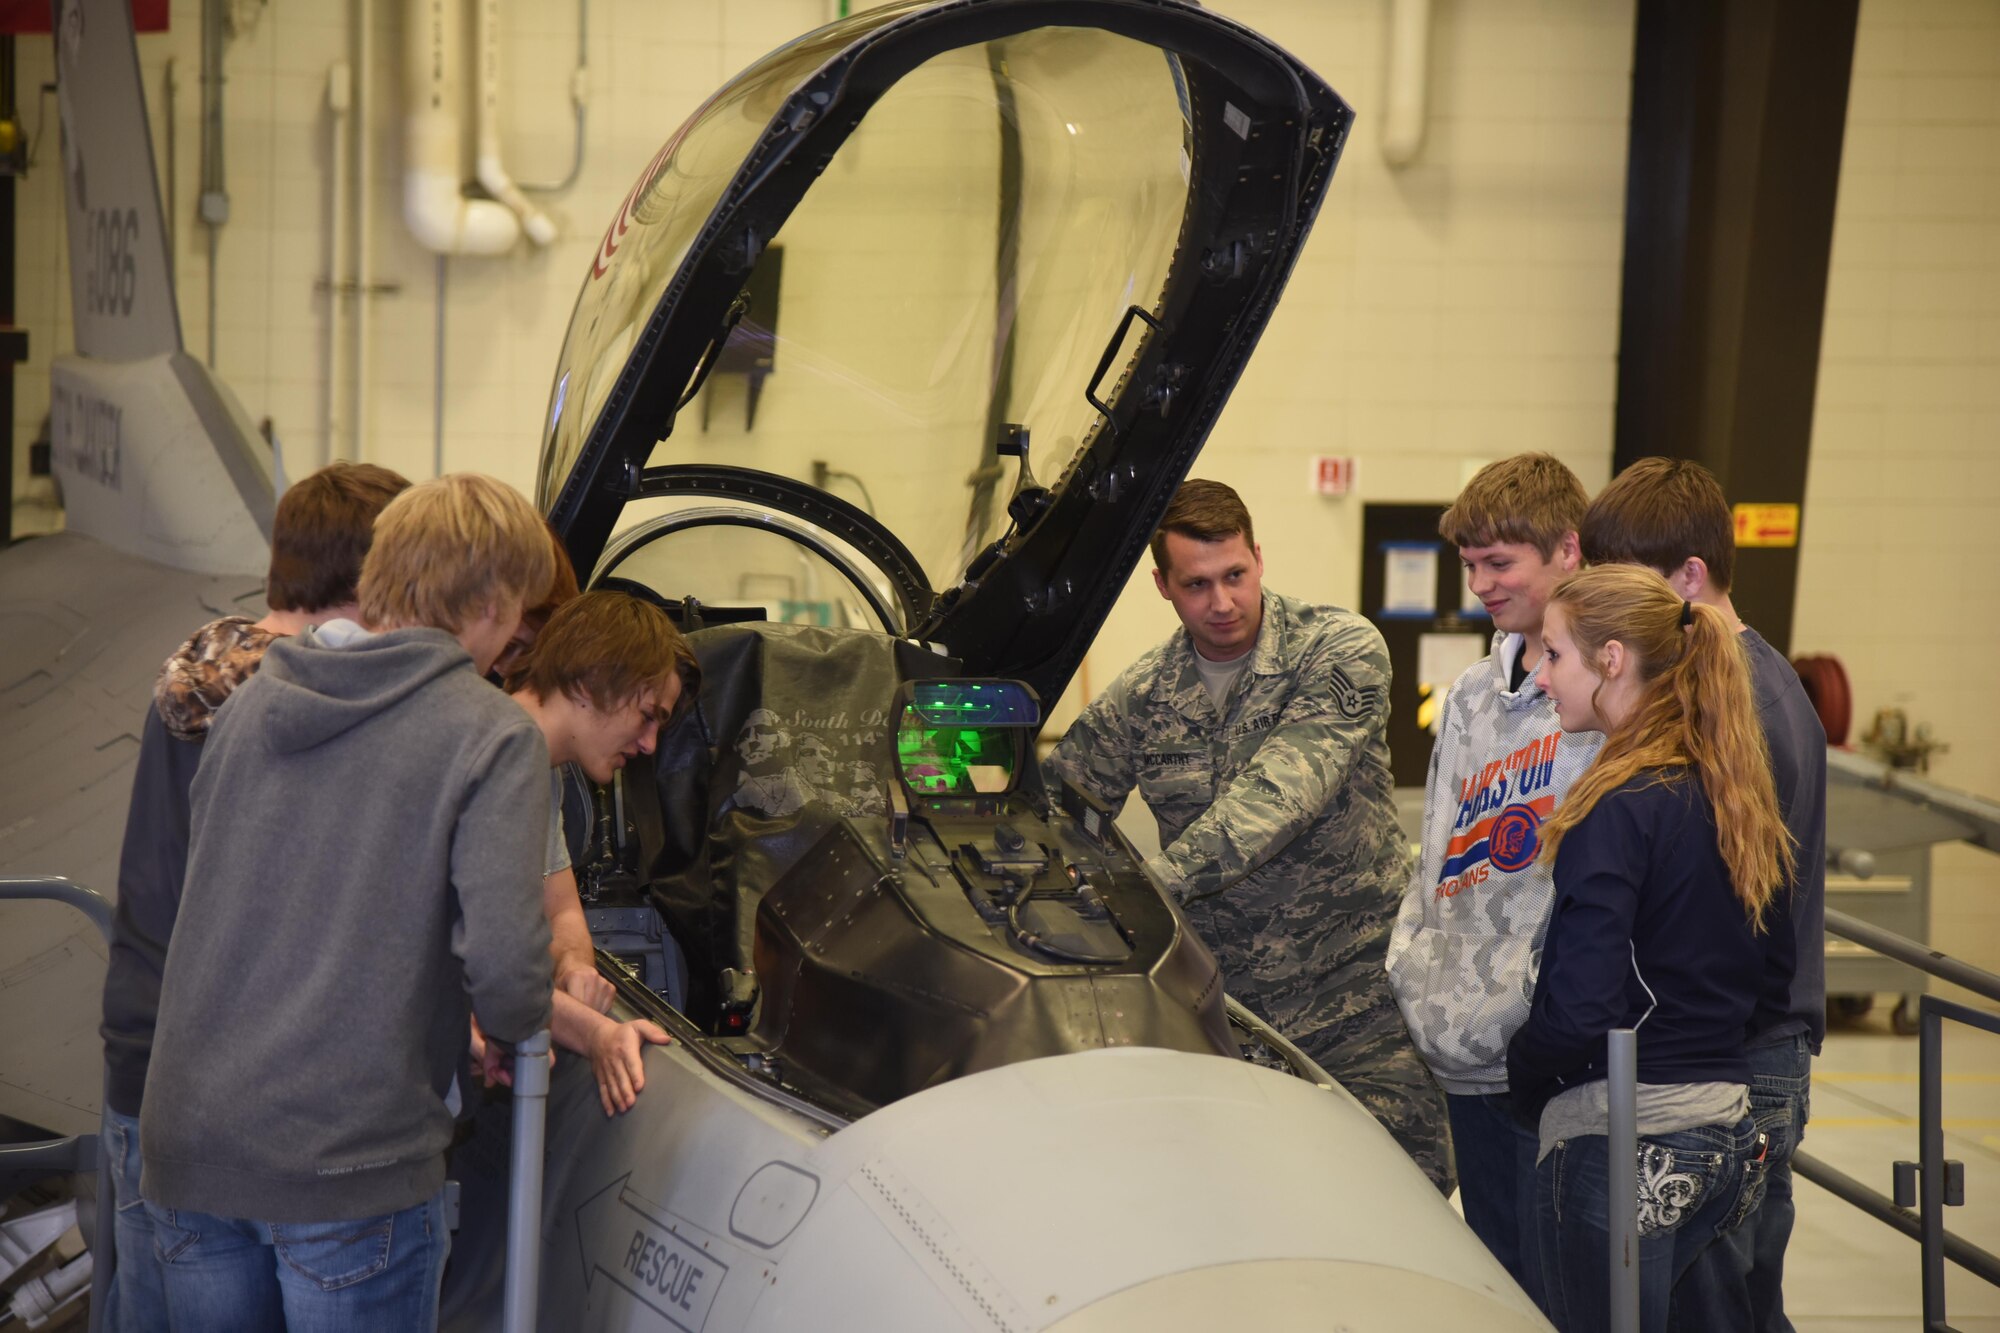 Sioux Falls, S.D. - Staff Sgt. Matt McCarthy, 114th Aircraft Maintenance Squadron electronic systems integrated mechanic, explains the function of an F-16 cockpit to students during the first night flying career day April 13, 2017, Joe Foss Field, S.D. Career day allows students, parents, and others who are interested in the South Dakota Air National Guard to see and learn about the different vocations the 114th Fighter Wing Airmen perform on a daily basis. (U.S. Air National Guard photo by Staff Sgt. Duane Duimstra/Released)